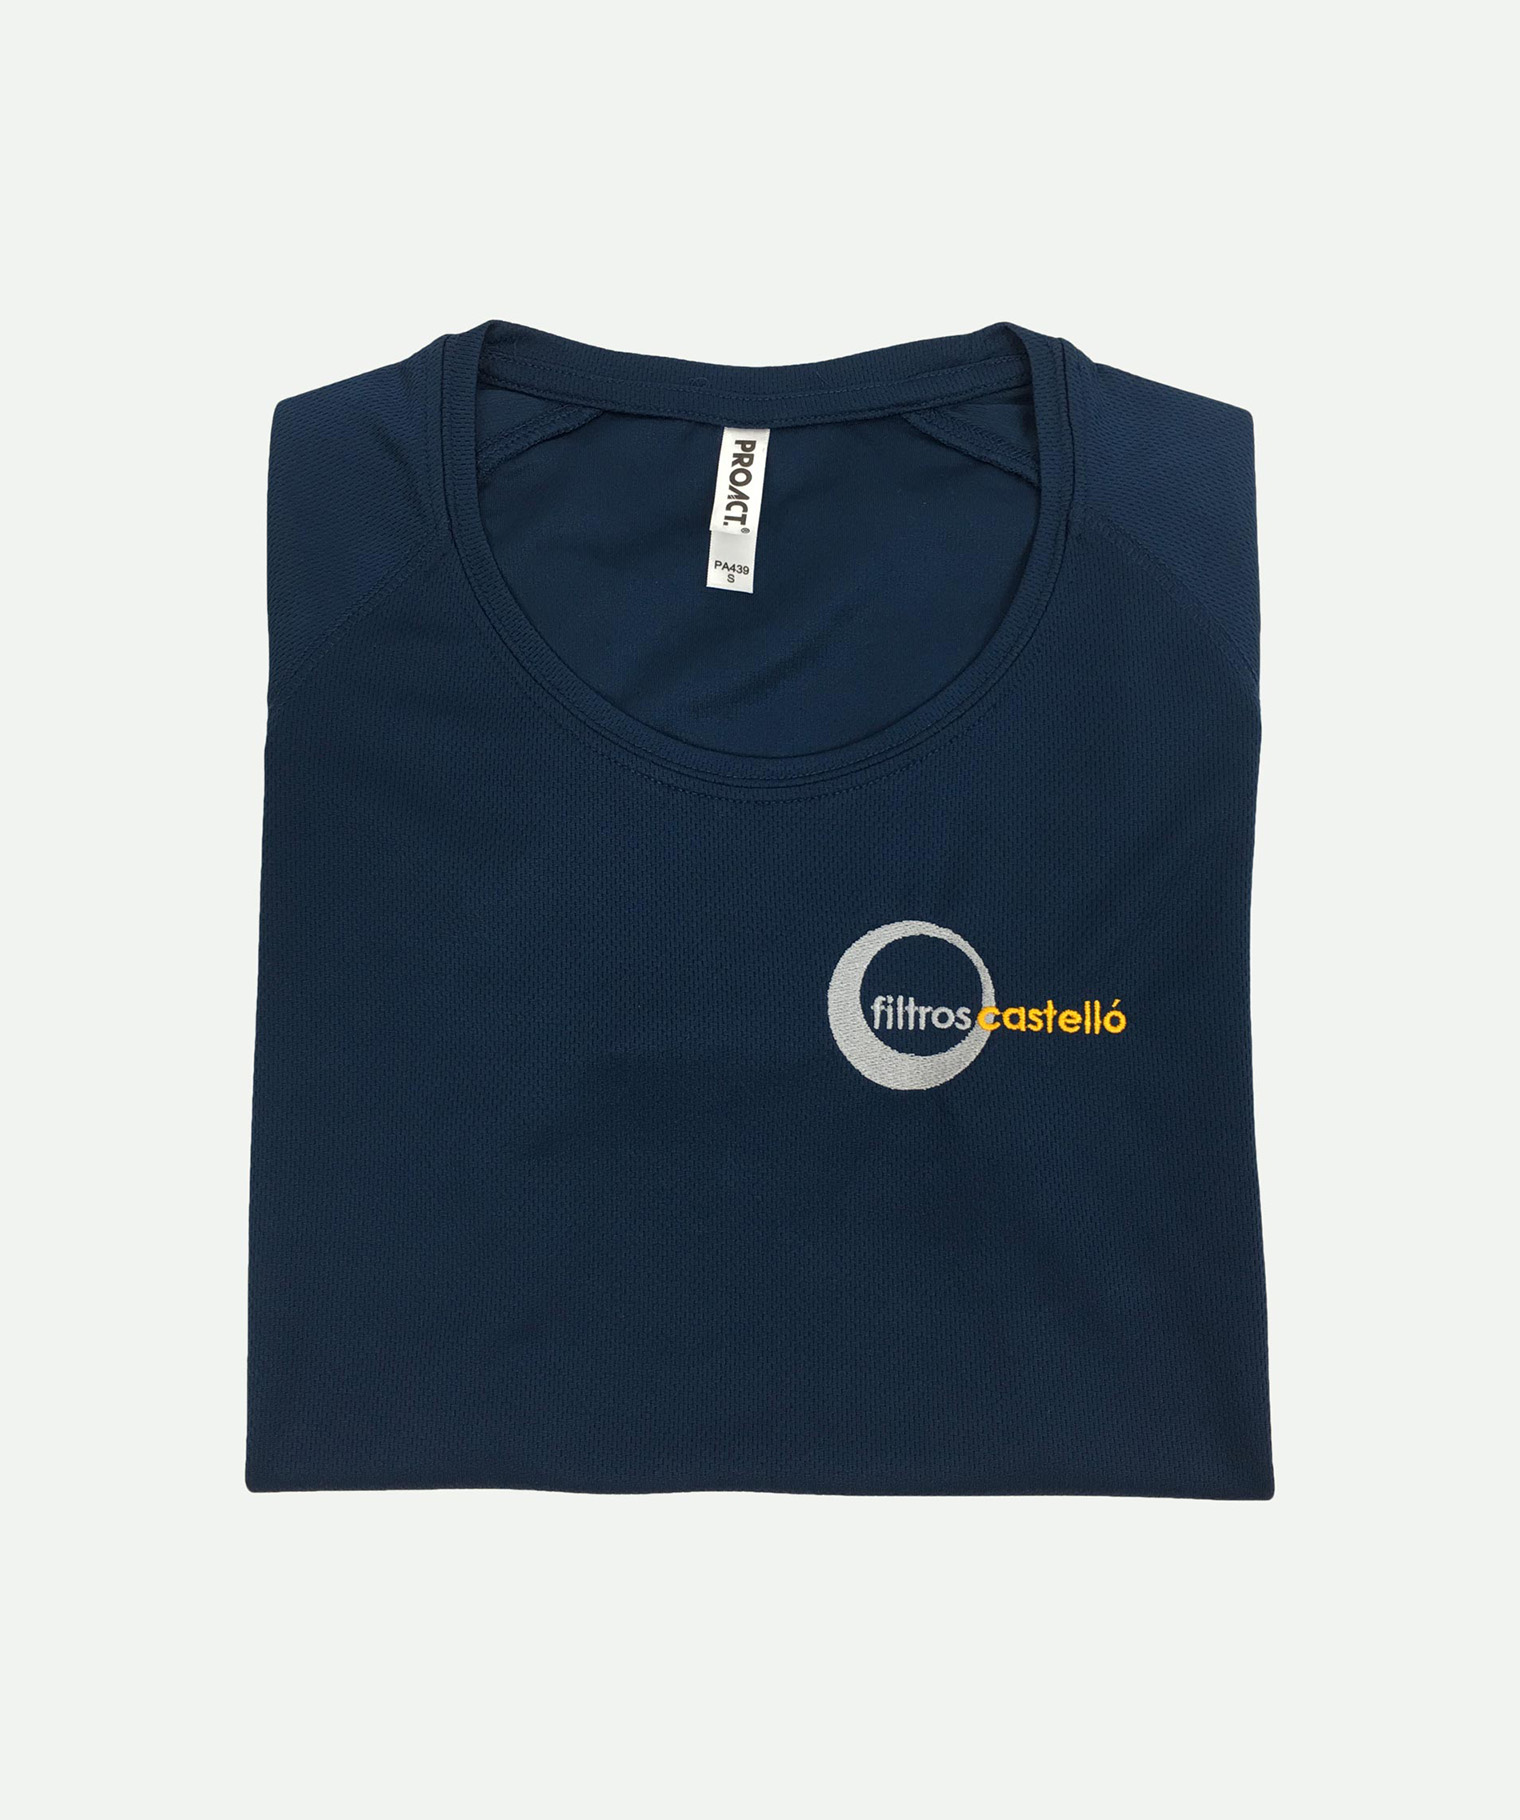 Technical embroidered T-shirt, navy blue